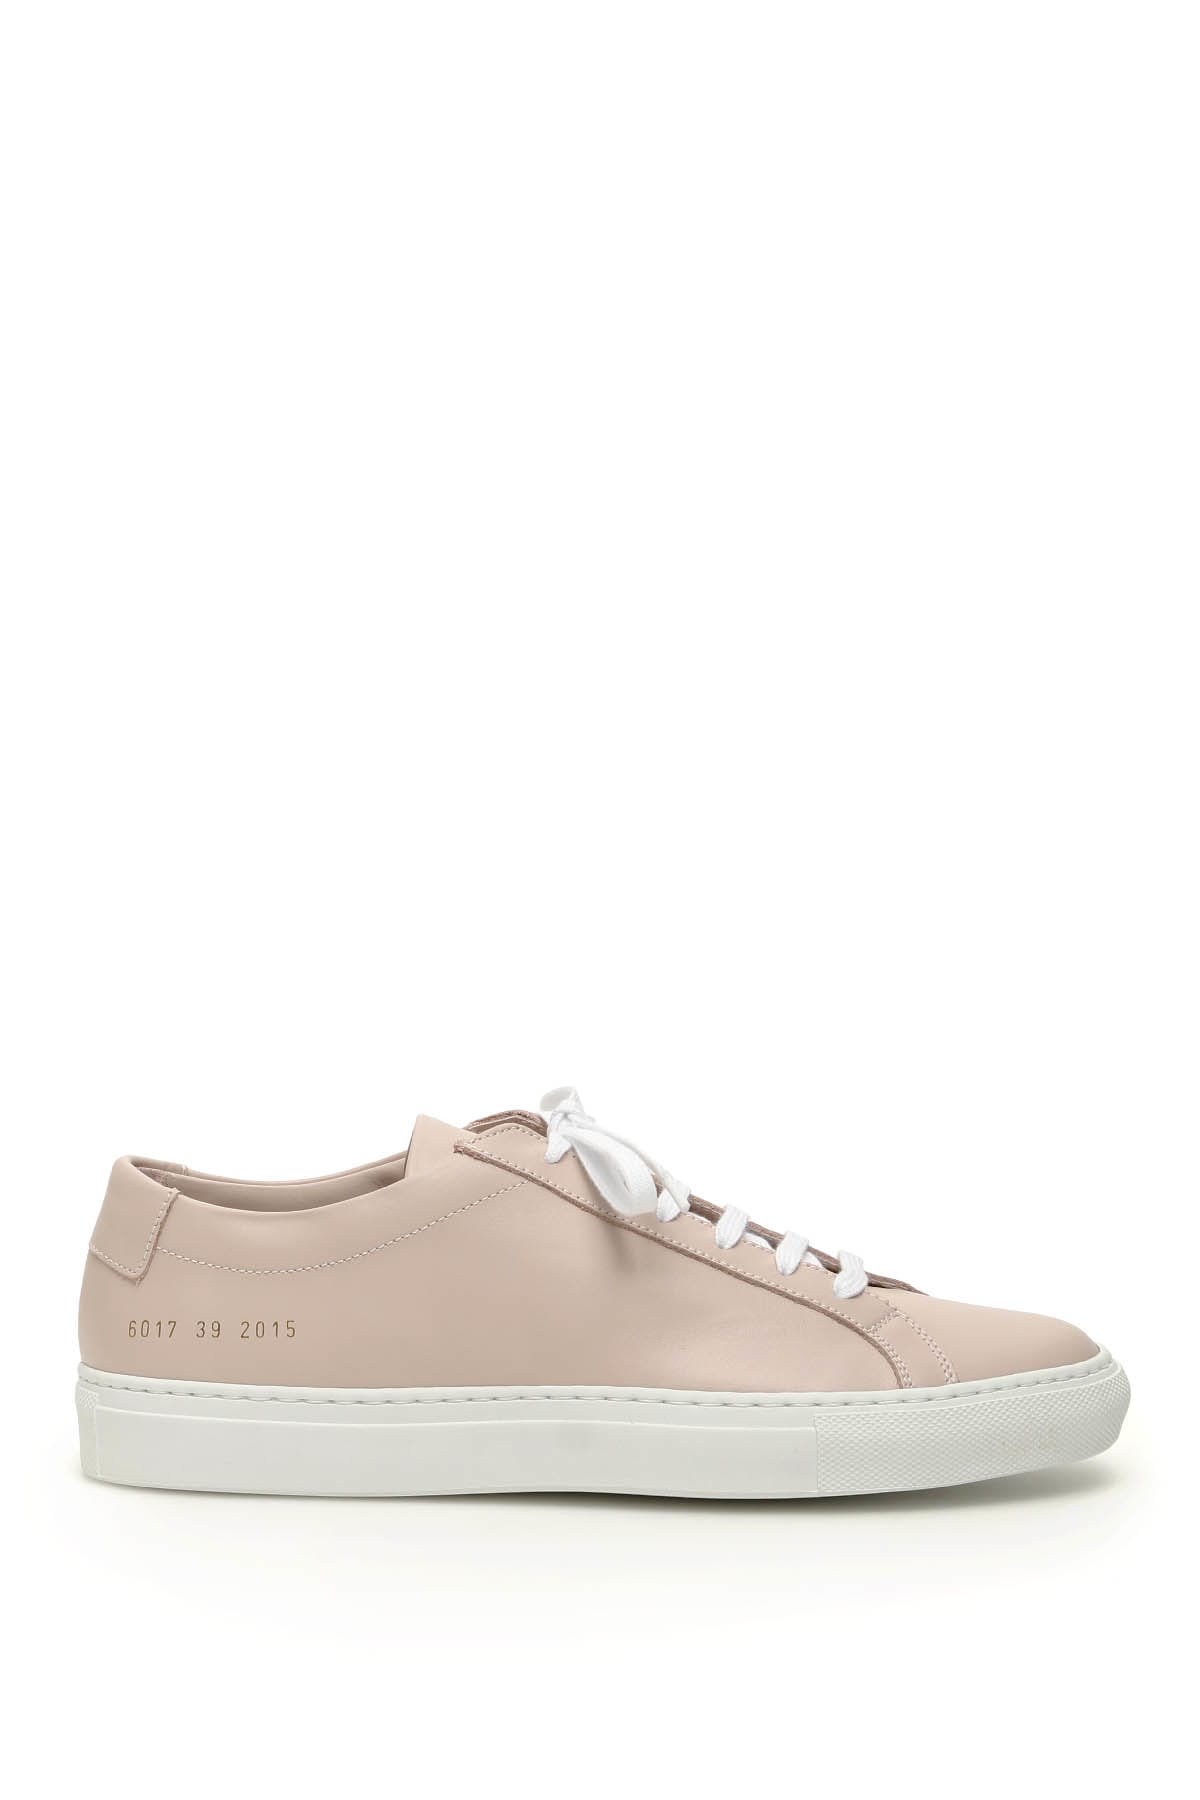 common projects blush pink